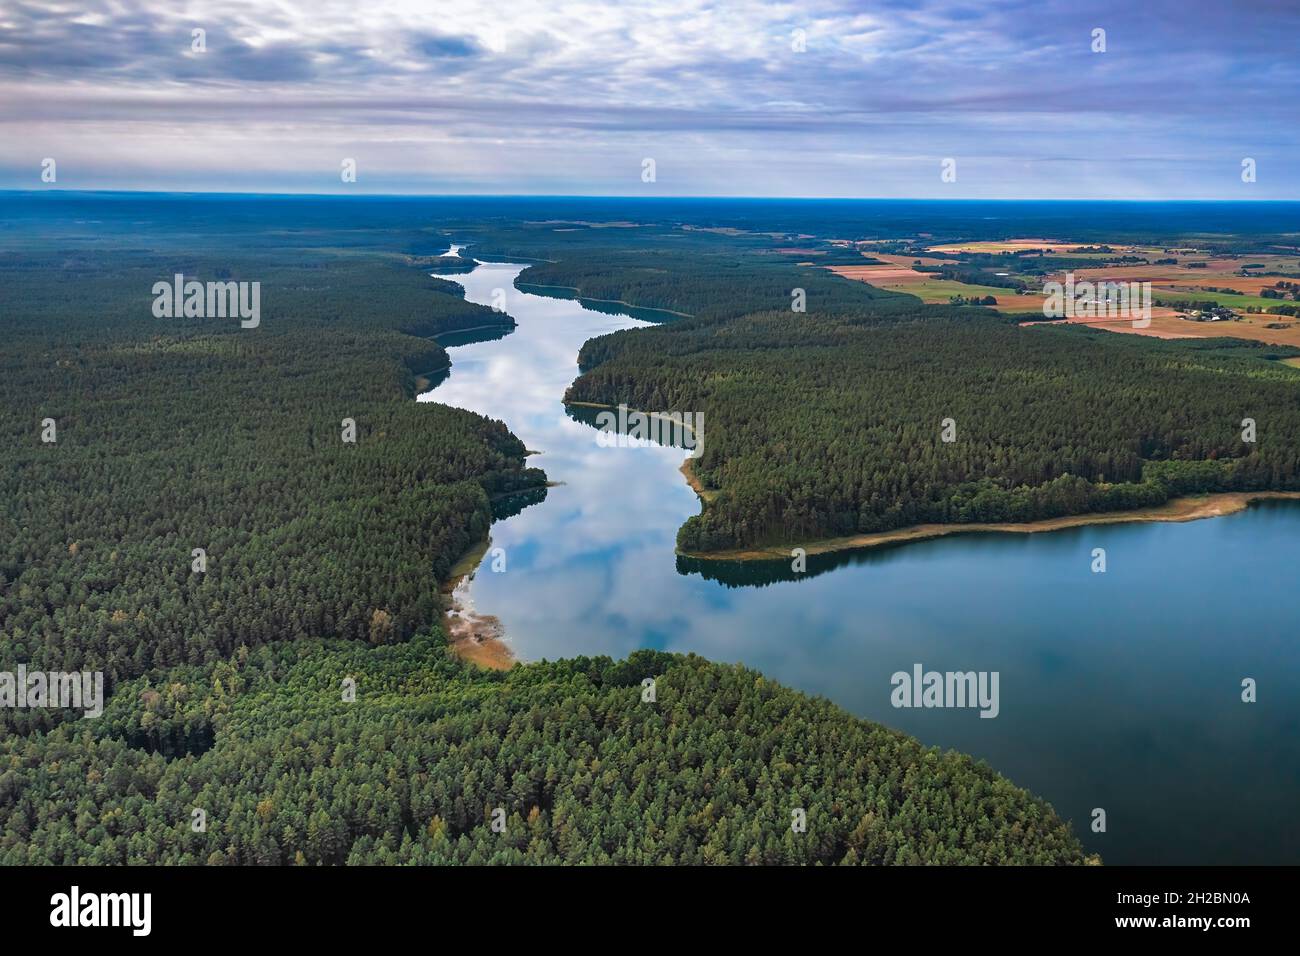 Aerial view of Ancia lake in Lithuania, shiny reflection of sky with clouds in the water of the lake Stock Photo